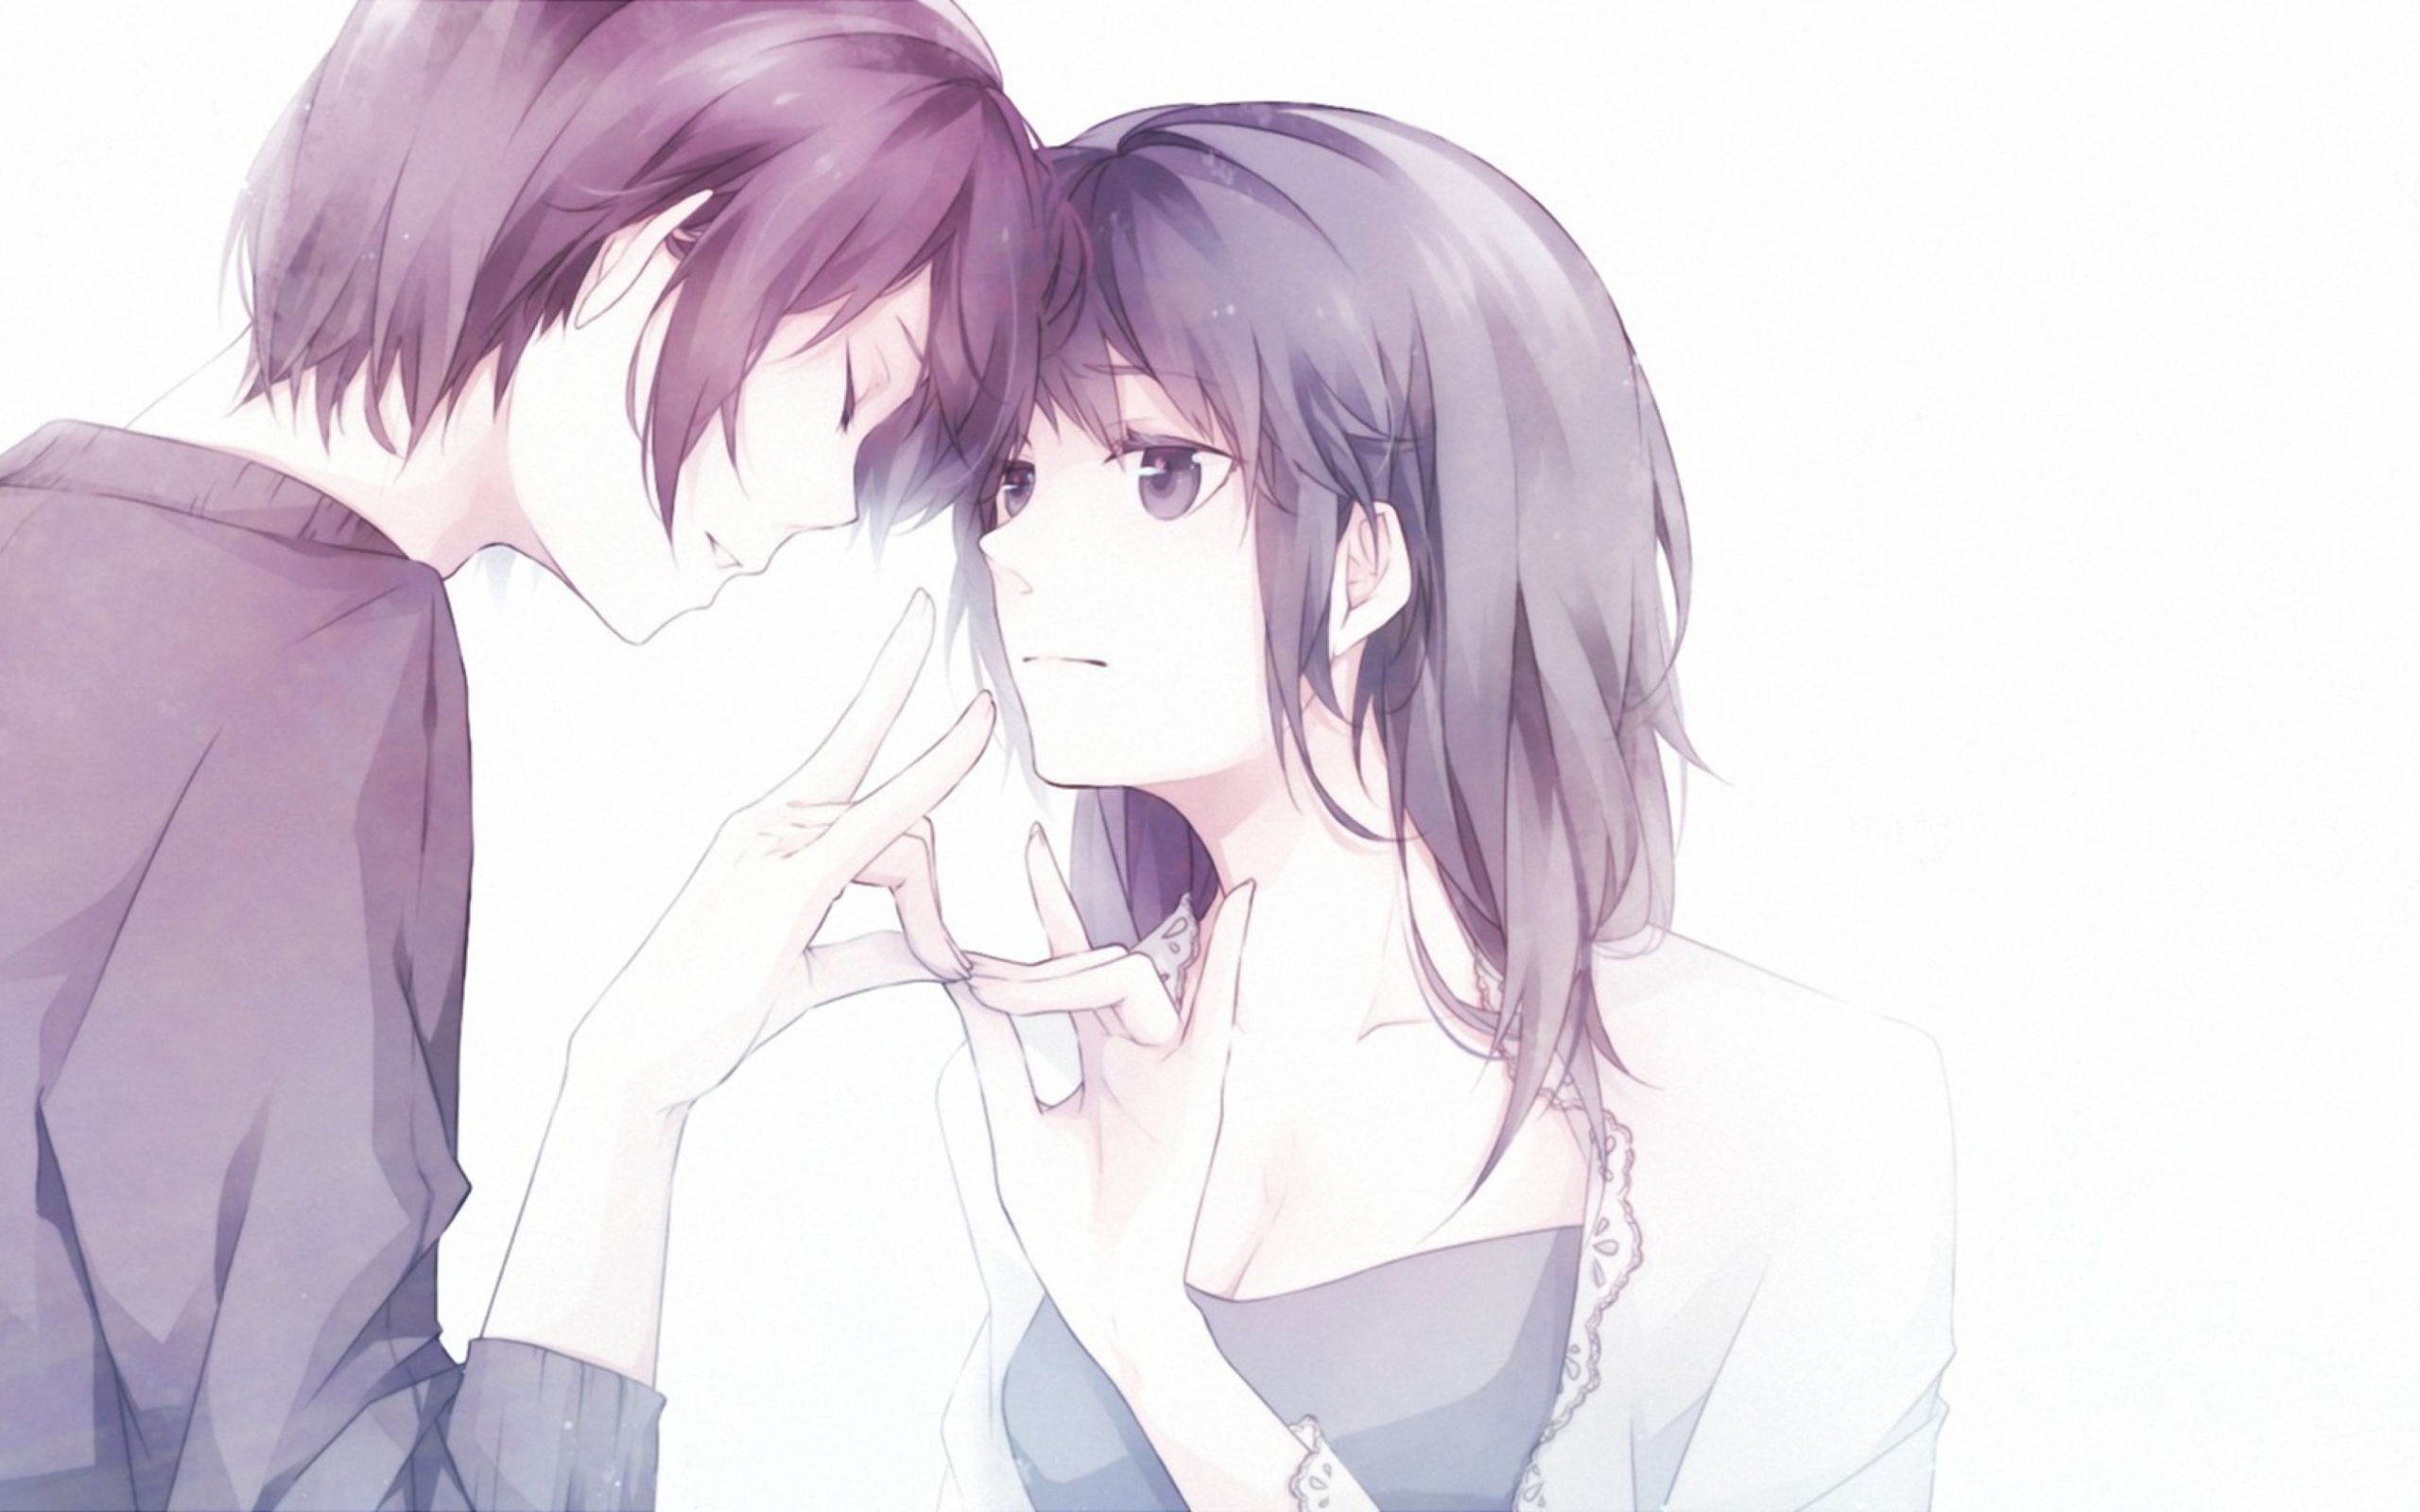 Guy And Girl With Violet Hair wallpaper 2560x1600